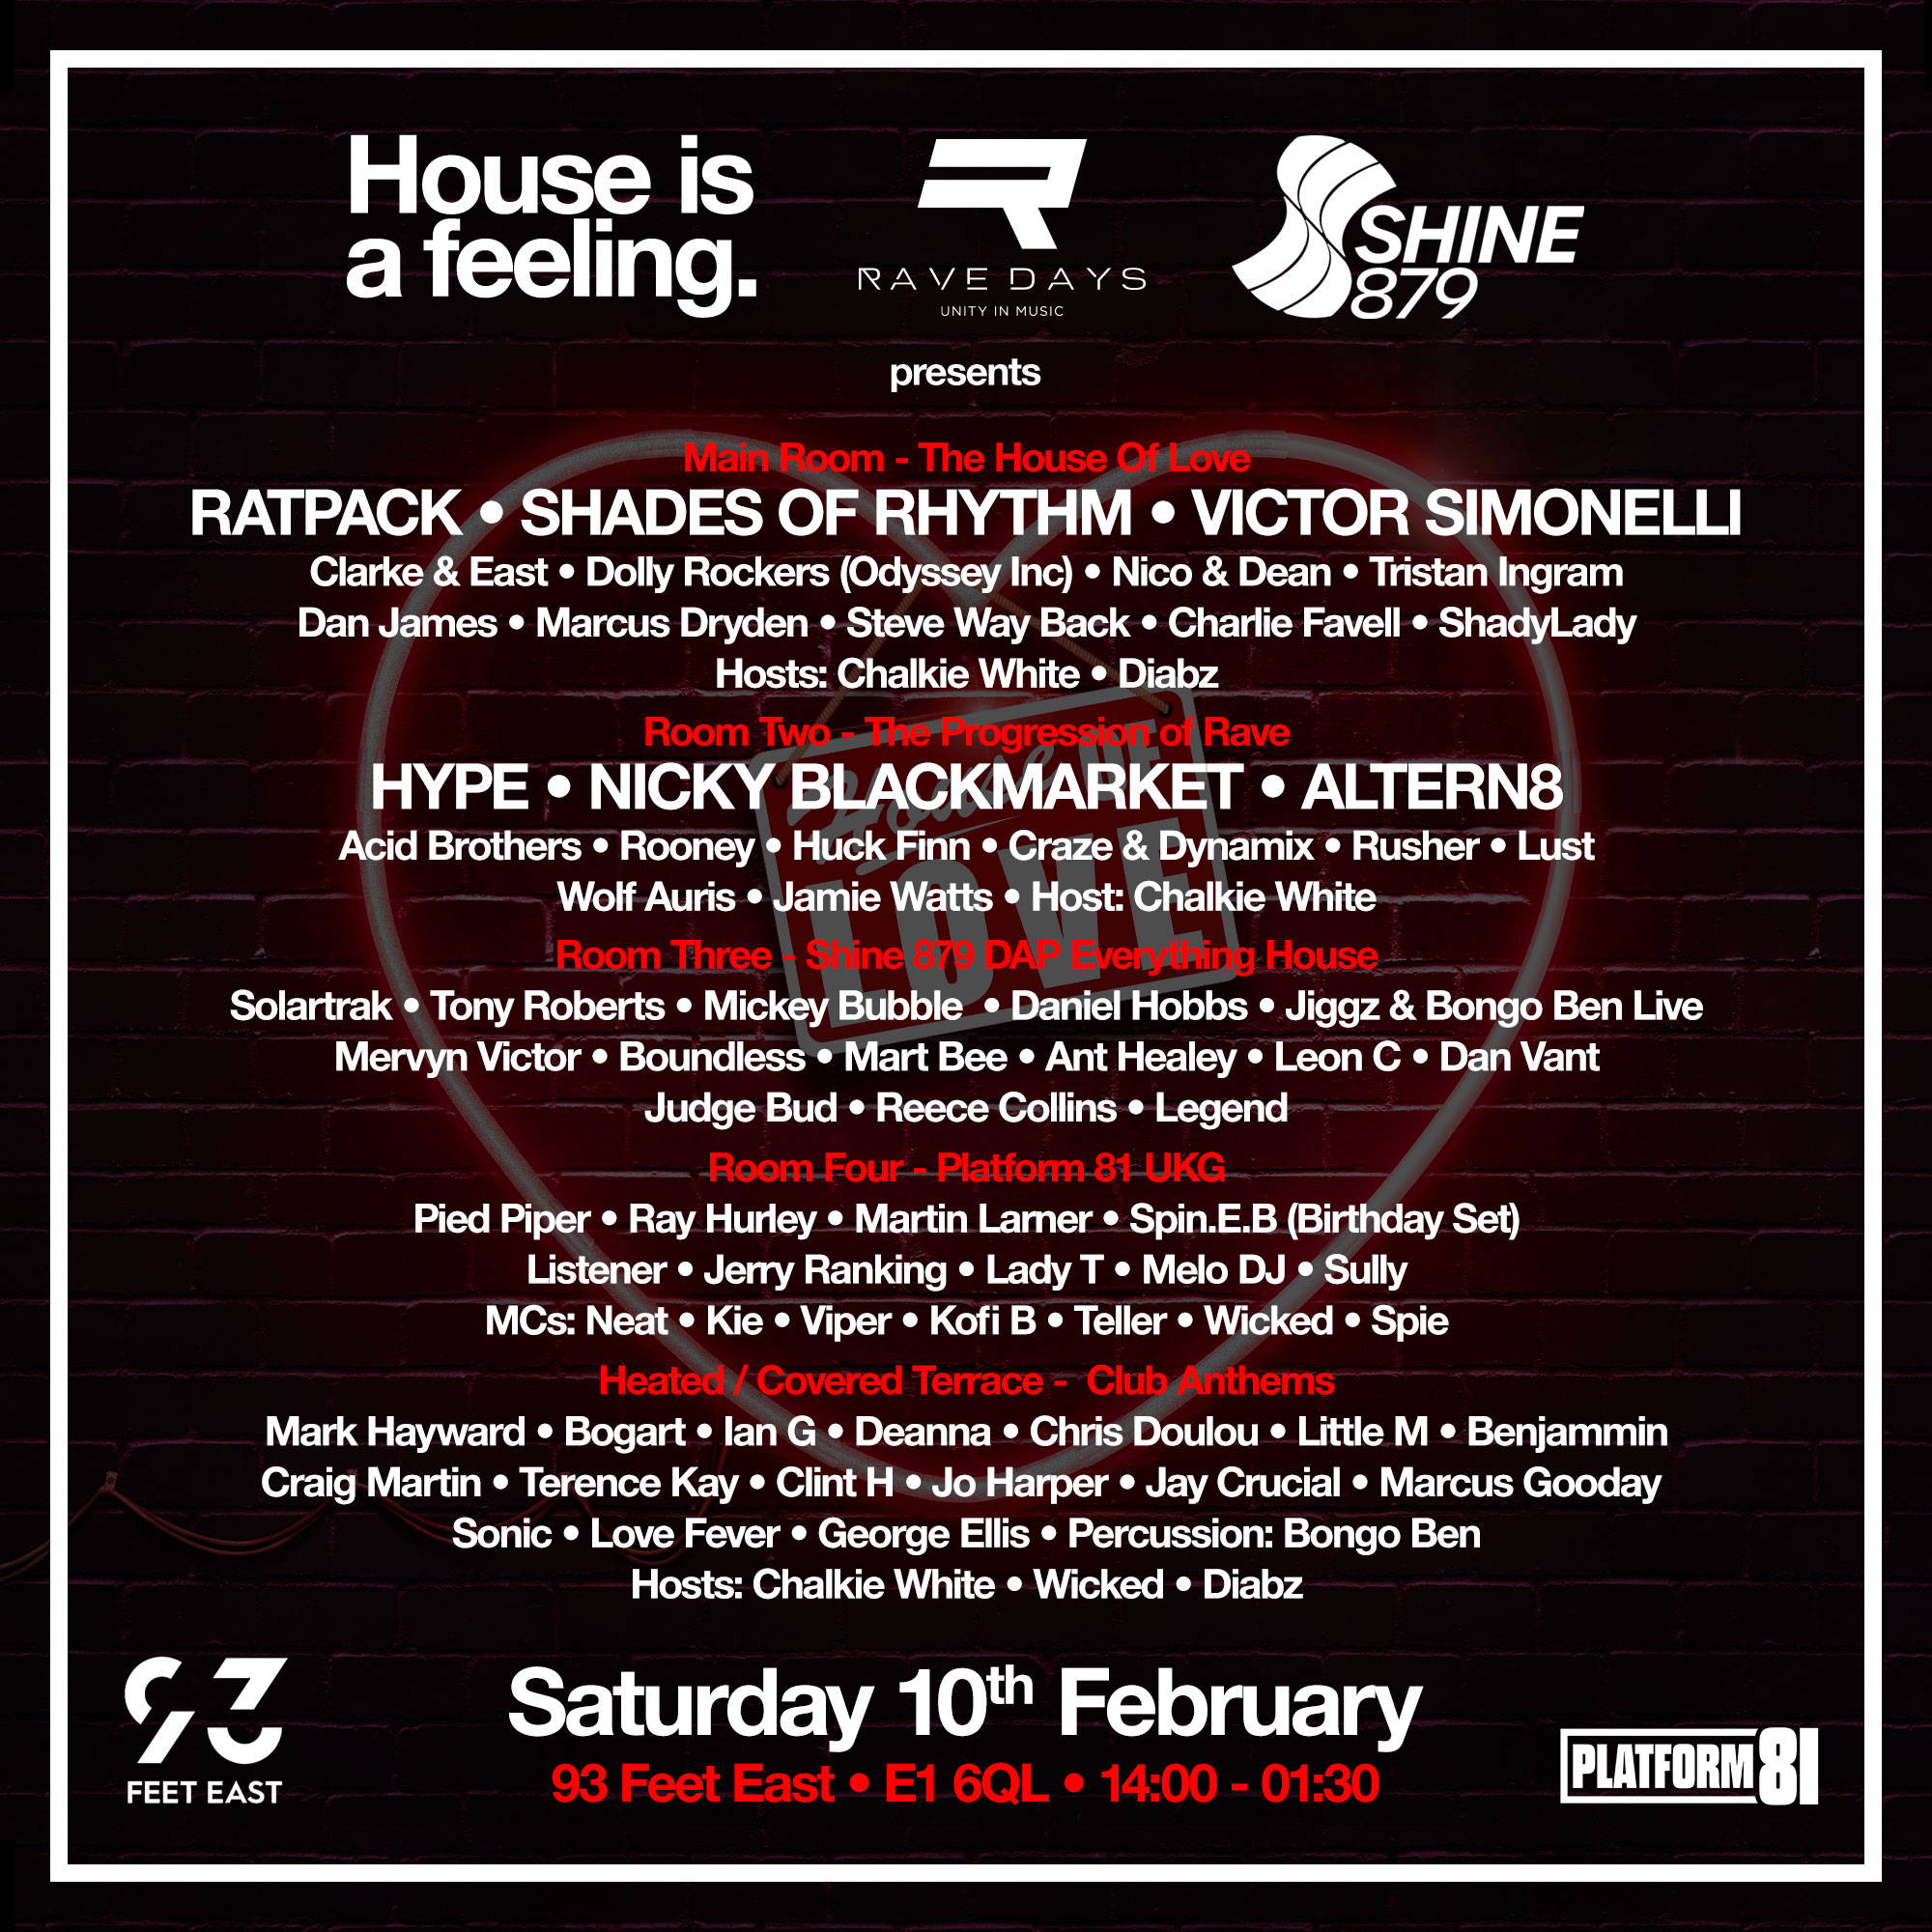 House is a feeling,Rave days & Shine 879 DAB present The House Of Love (NO ID NO ENTRY)  - Página trasera